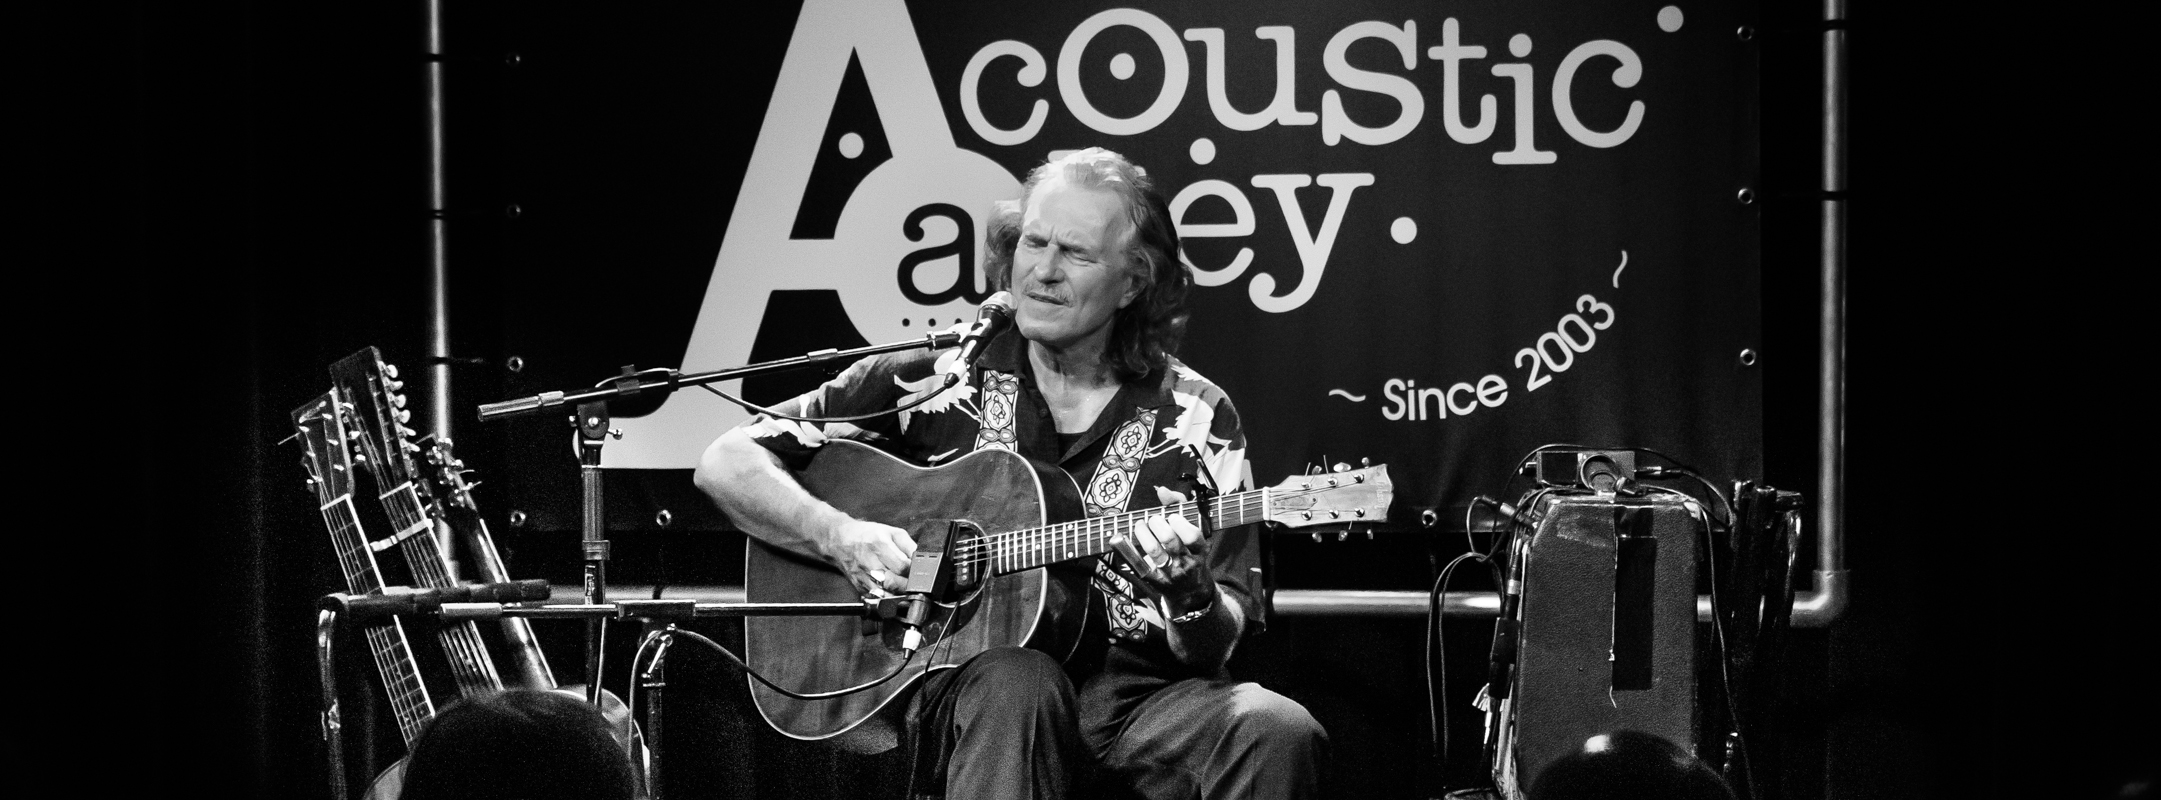 22 april: Hans Theessink terug in Acoustic Alley